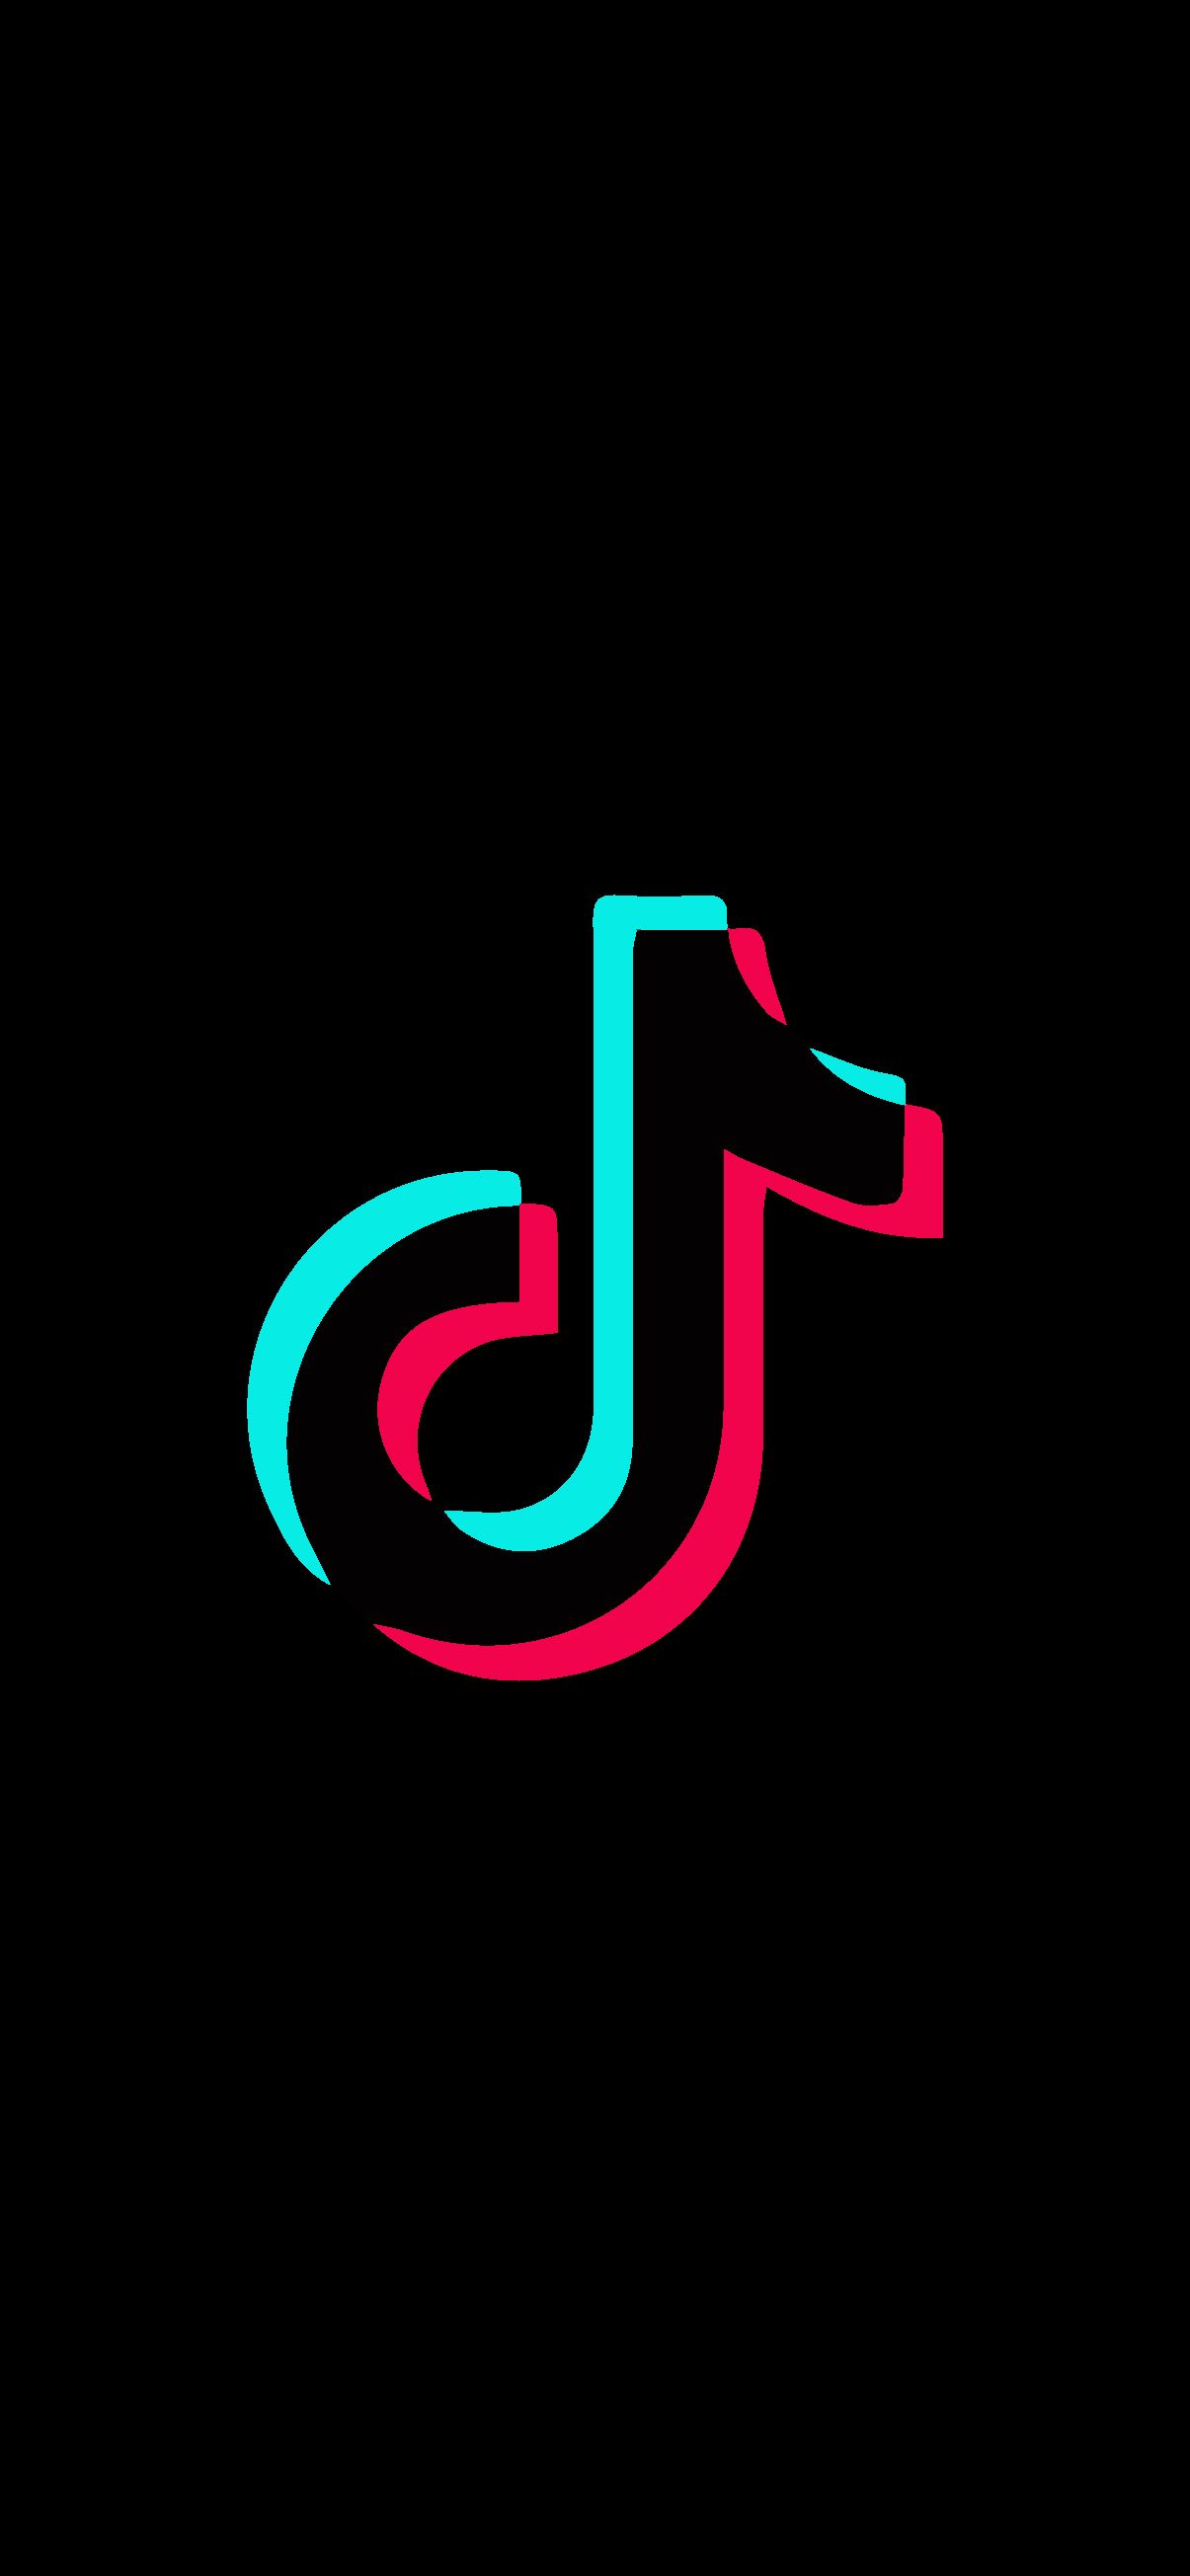 TikTok is a video-sharing social networking service owned by Chinese company ByteDance. - TikTok